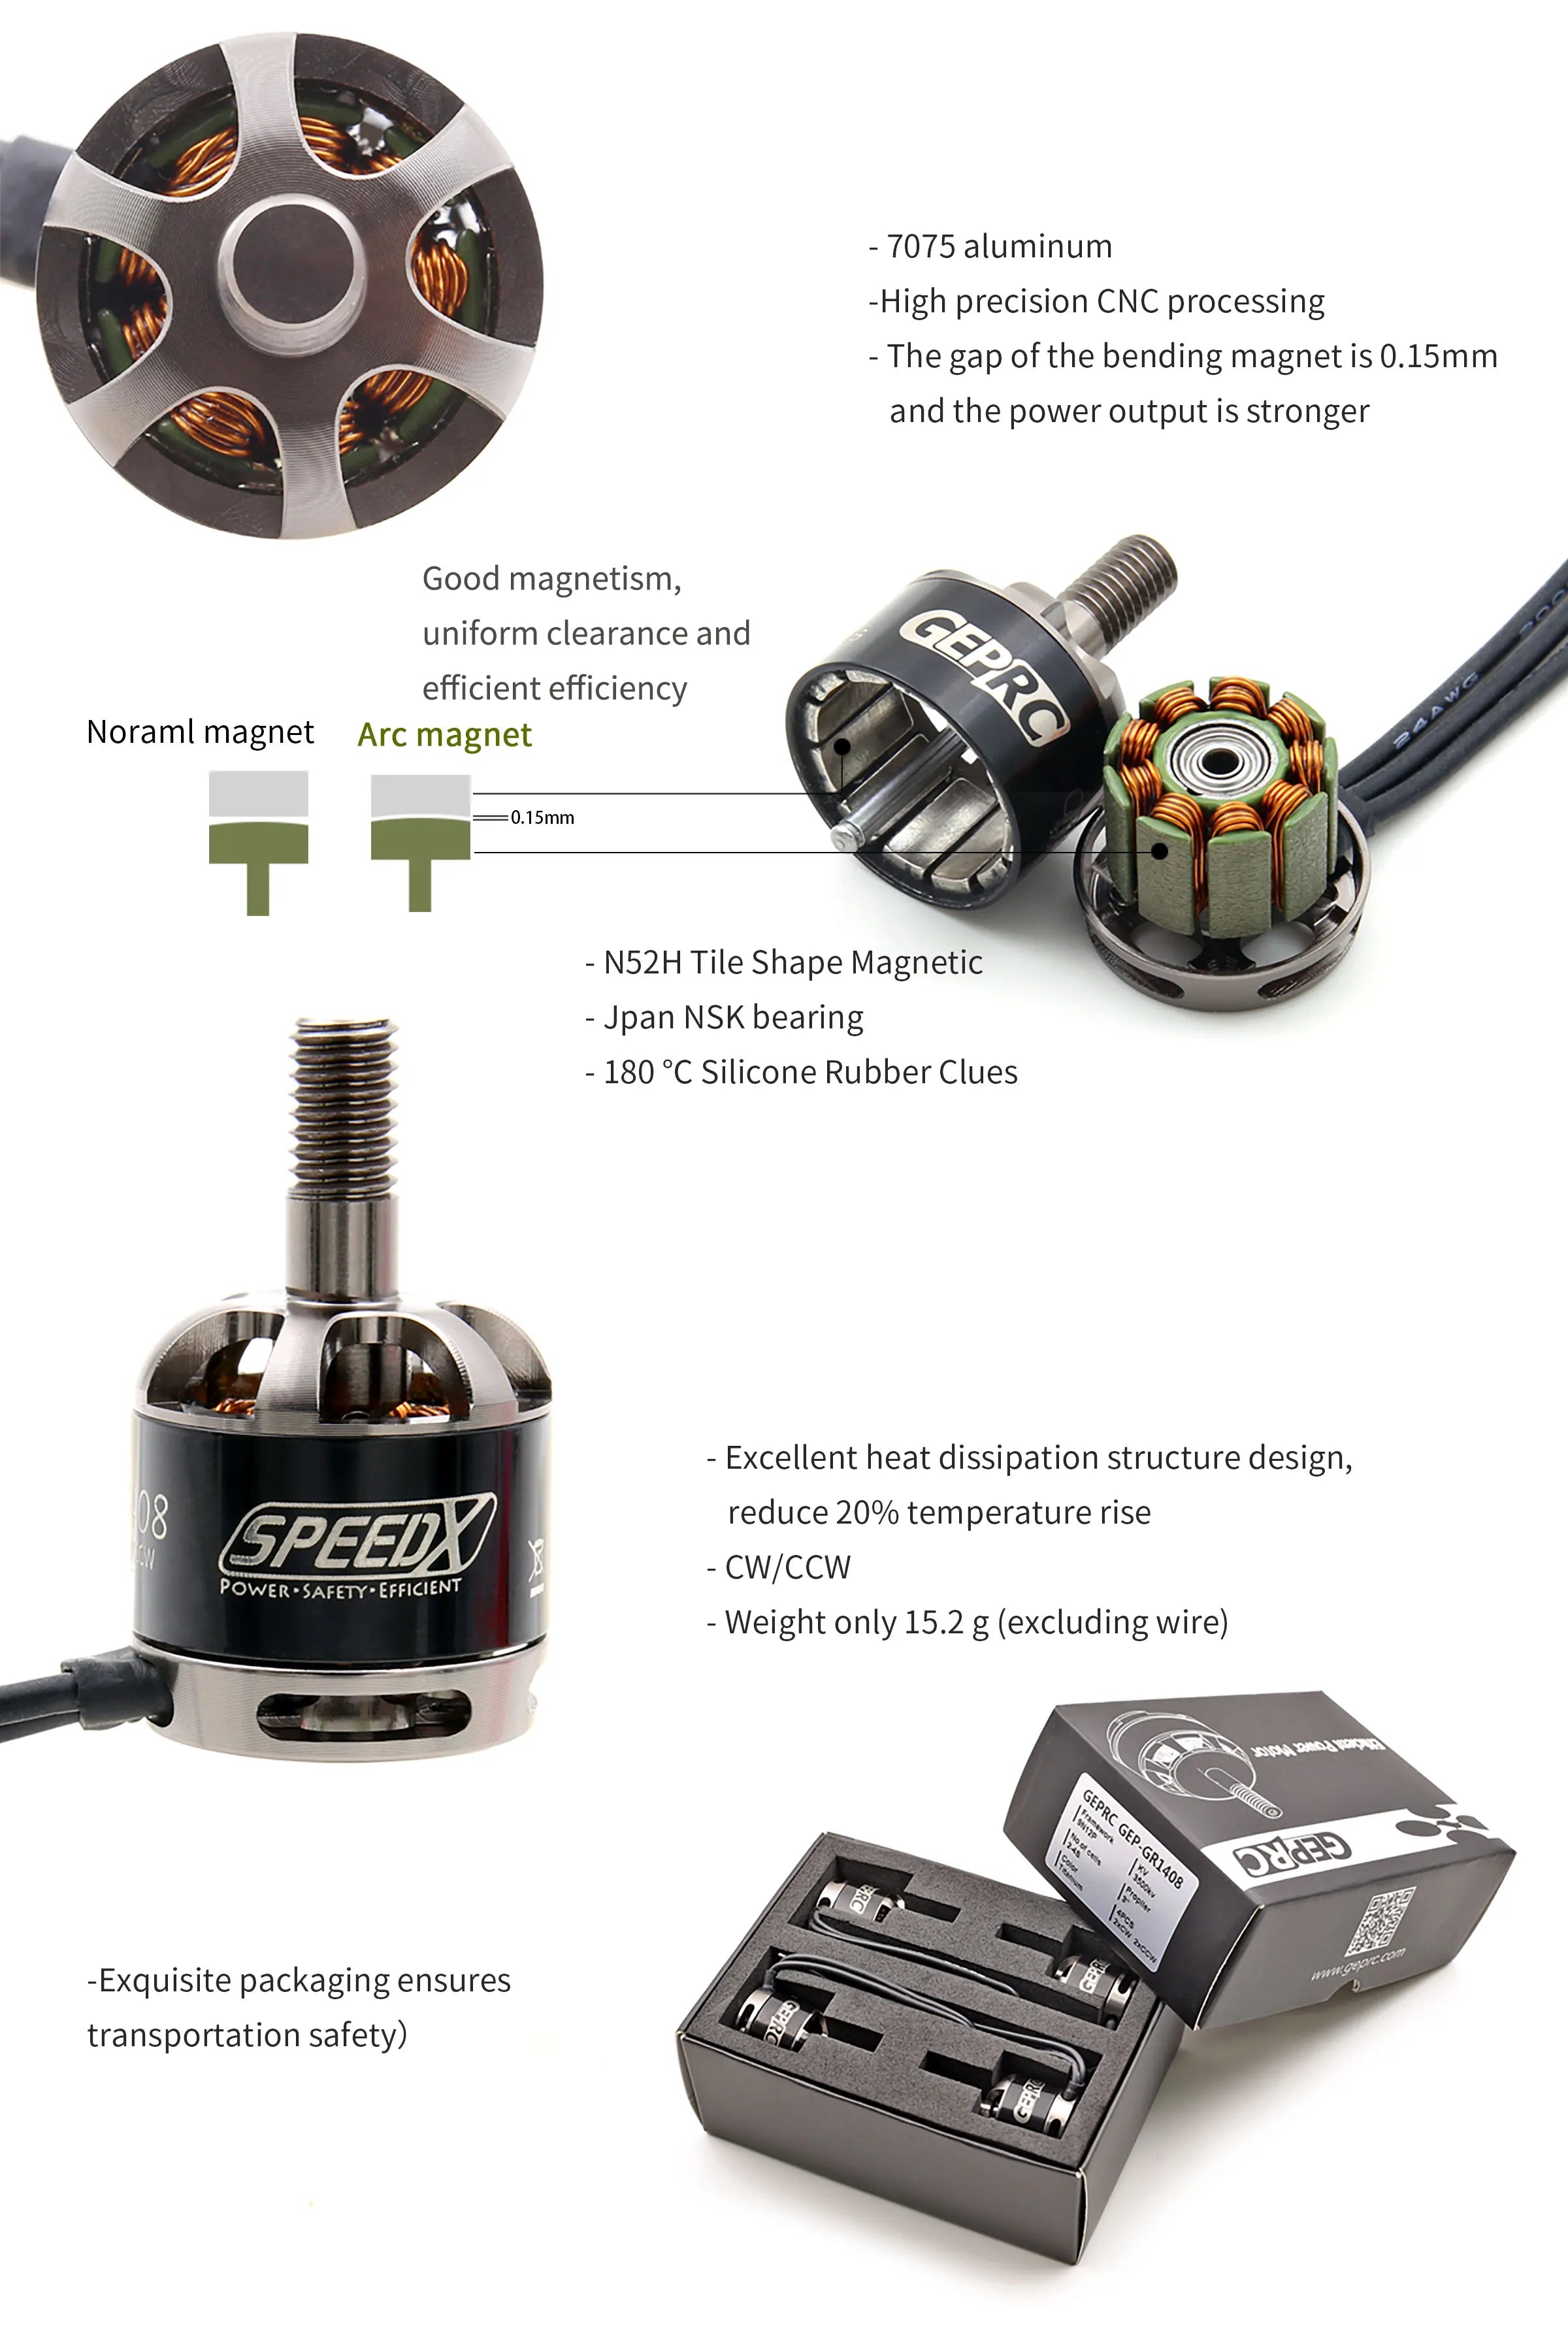 GEPRC GR1408 2500KV Motor, gap of bending magnet is 0.15mm and power output is stronger . noraml